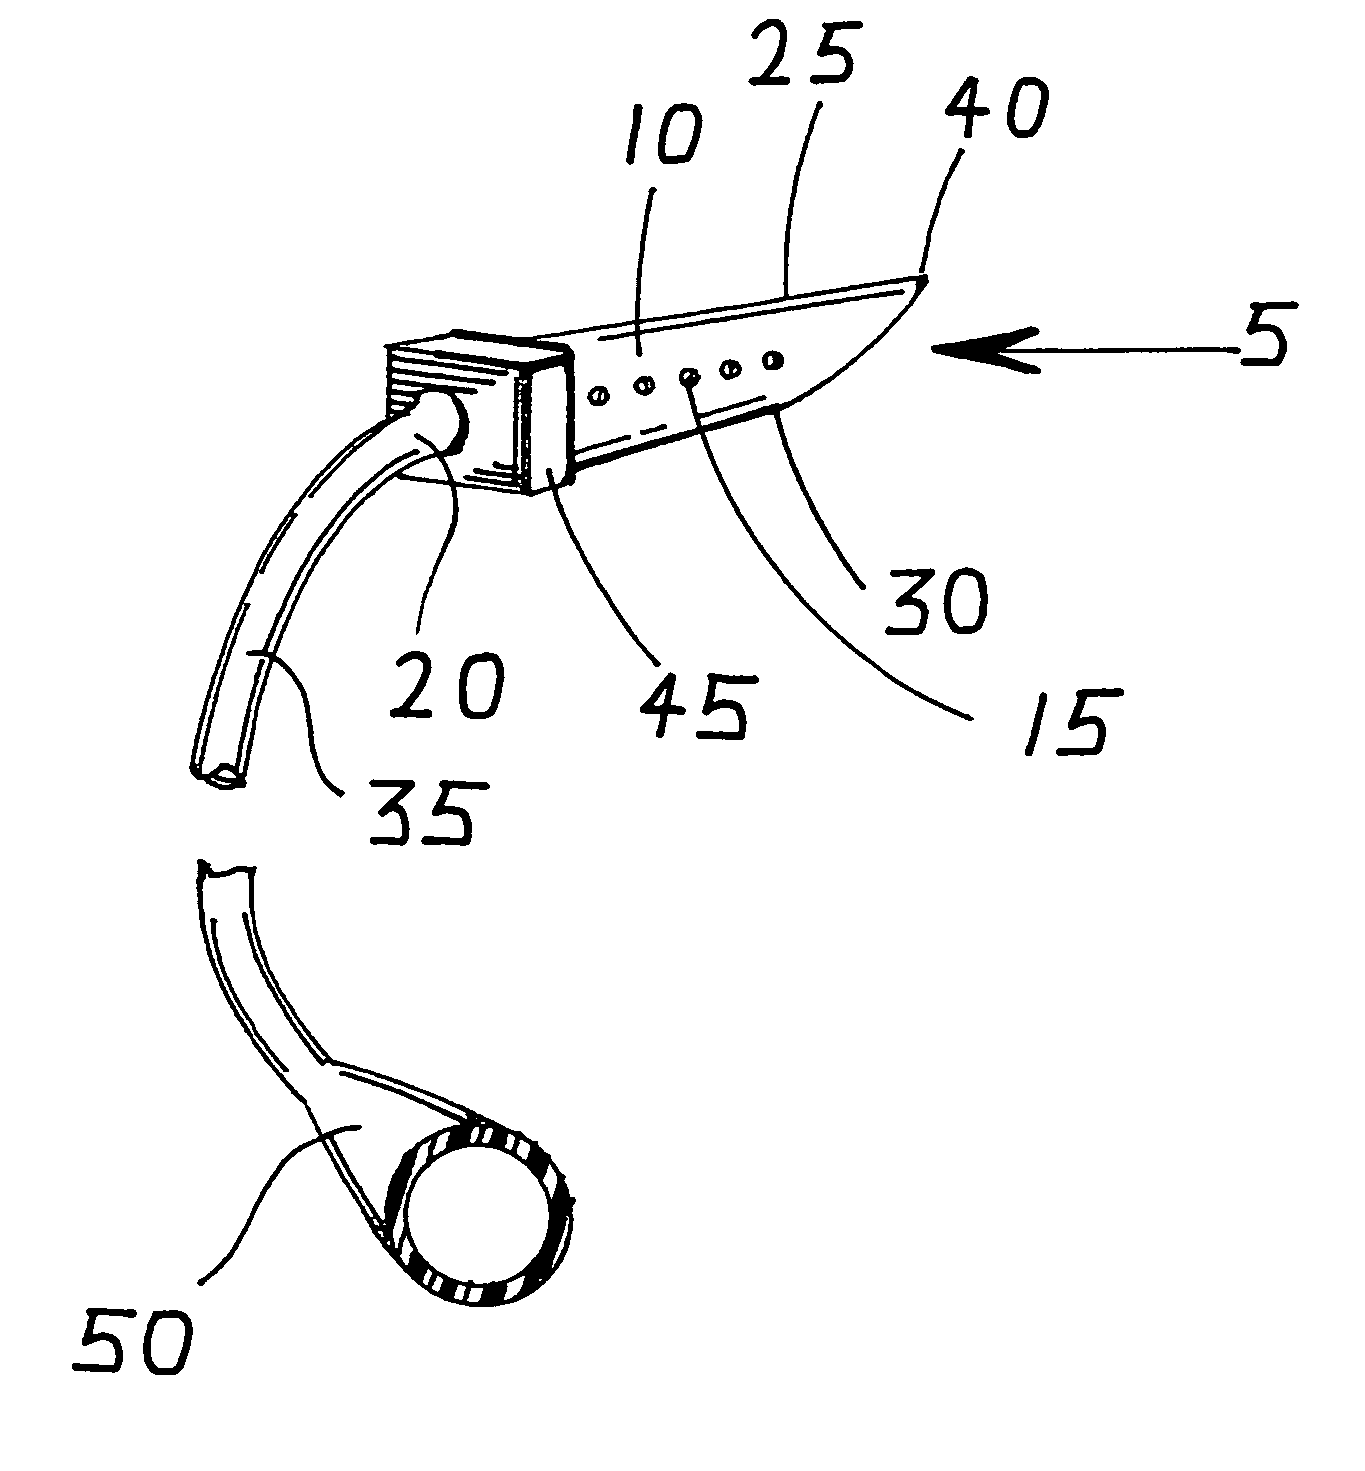 Dental wedge with a flexible tubing suction line